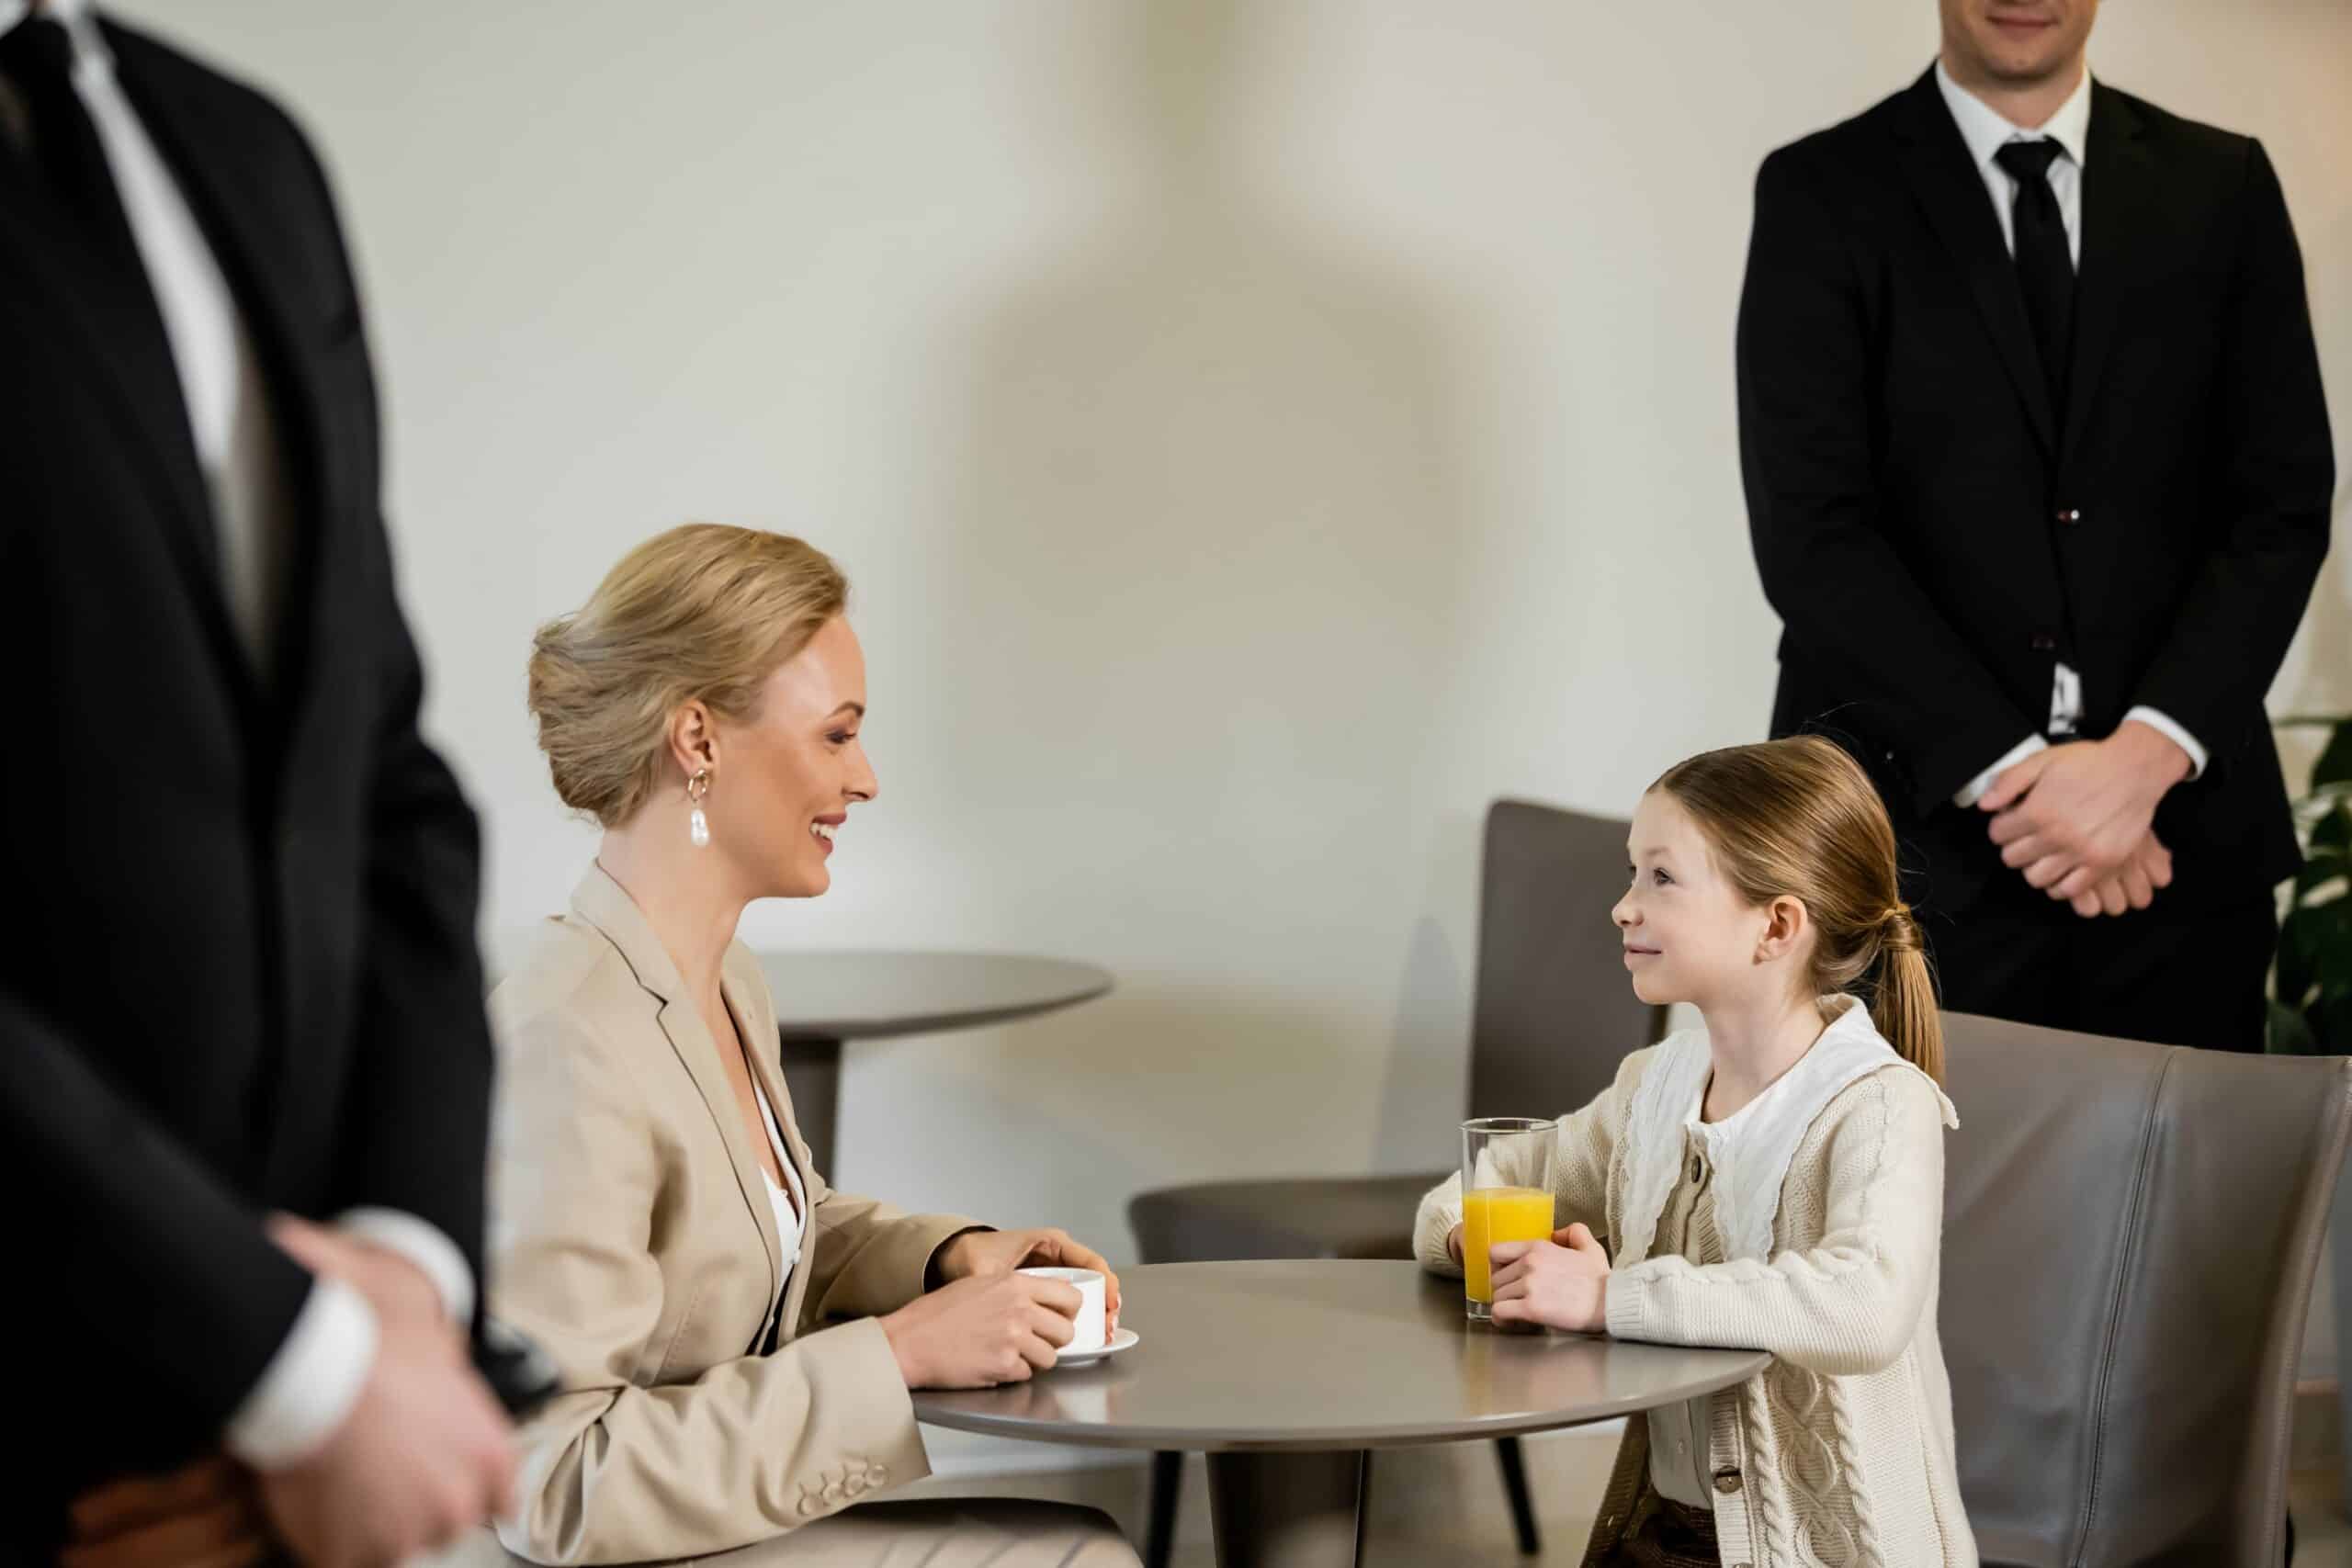 A mother and child enjoying a relaxed conversation with a professional security agent discreetly in the background, emphasizing the personal security services provided by Global Risk Solutions, Inc.